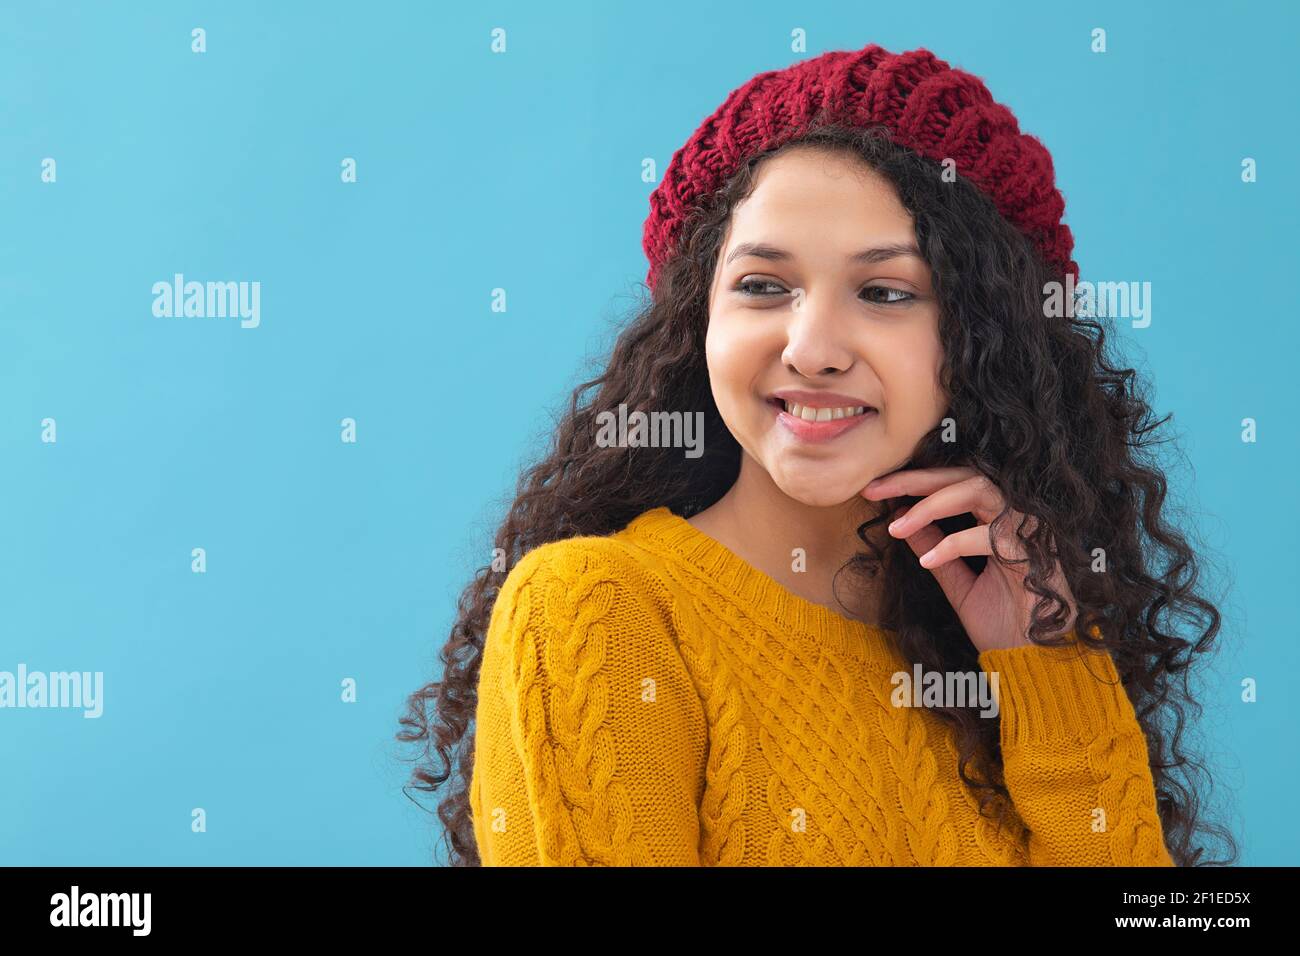 PORTRAIT OF A TEENAGE GIRL IN WOOLEN CLOTHES LOOKING AWAY AND POSING Stock Photo